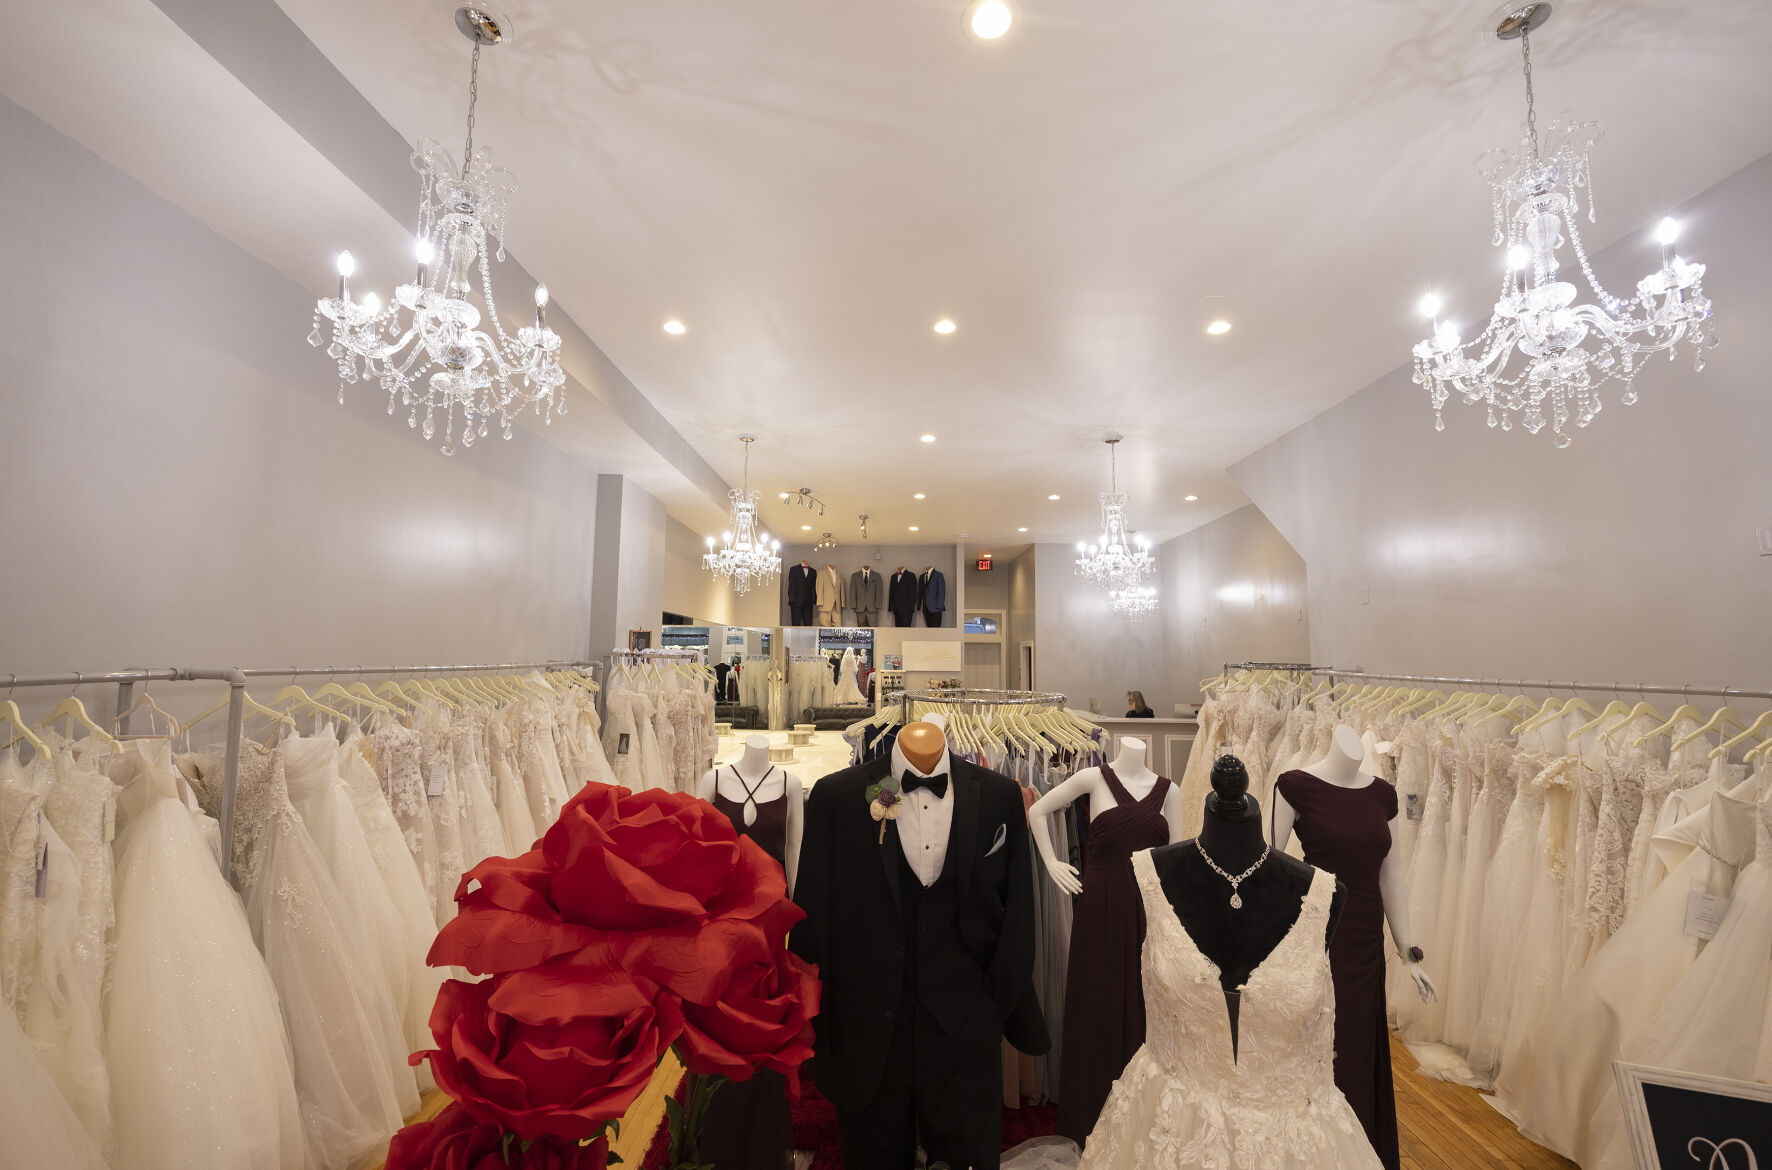 Interior of All in One Bridal on Main Street in Dubuque.    PHOTO CREDIT: Stephen Gassman
Telegraph Herald